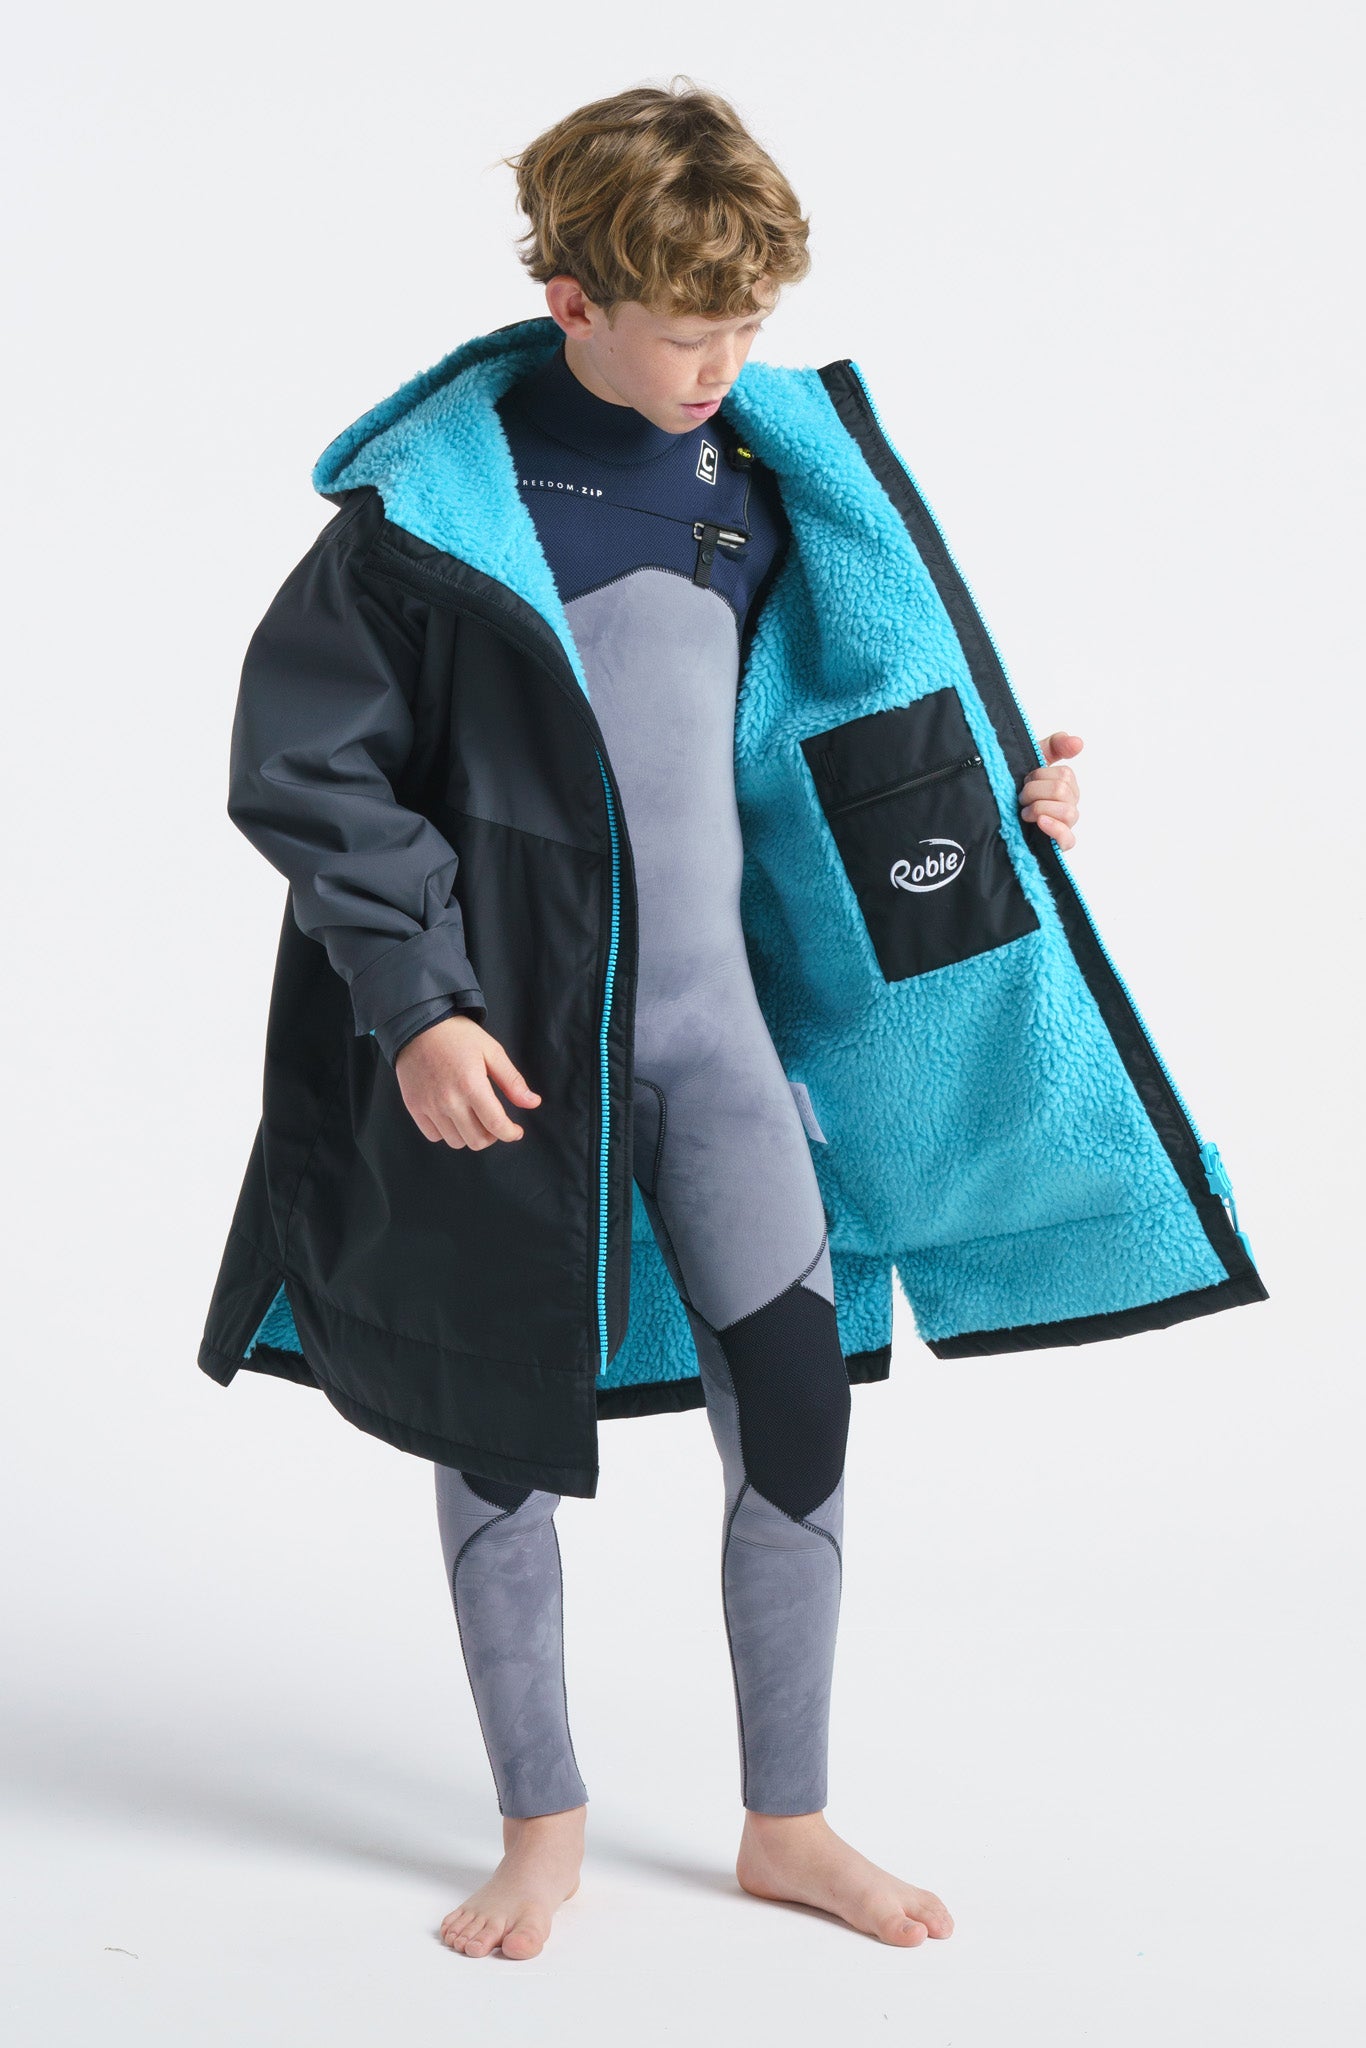 robie-robes-dry-series-changing-robe-waterproof-preorder-product-blacksheepsurfco-galway-ireland-charcoal-blue-atoll-junior